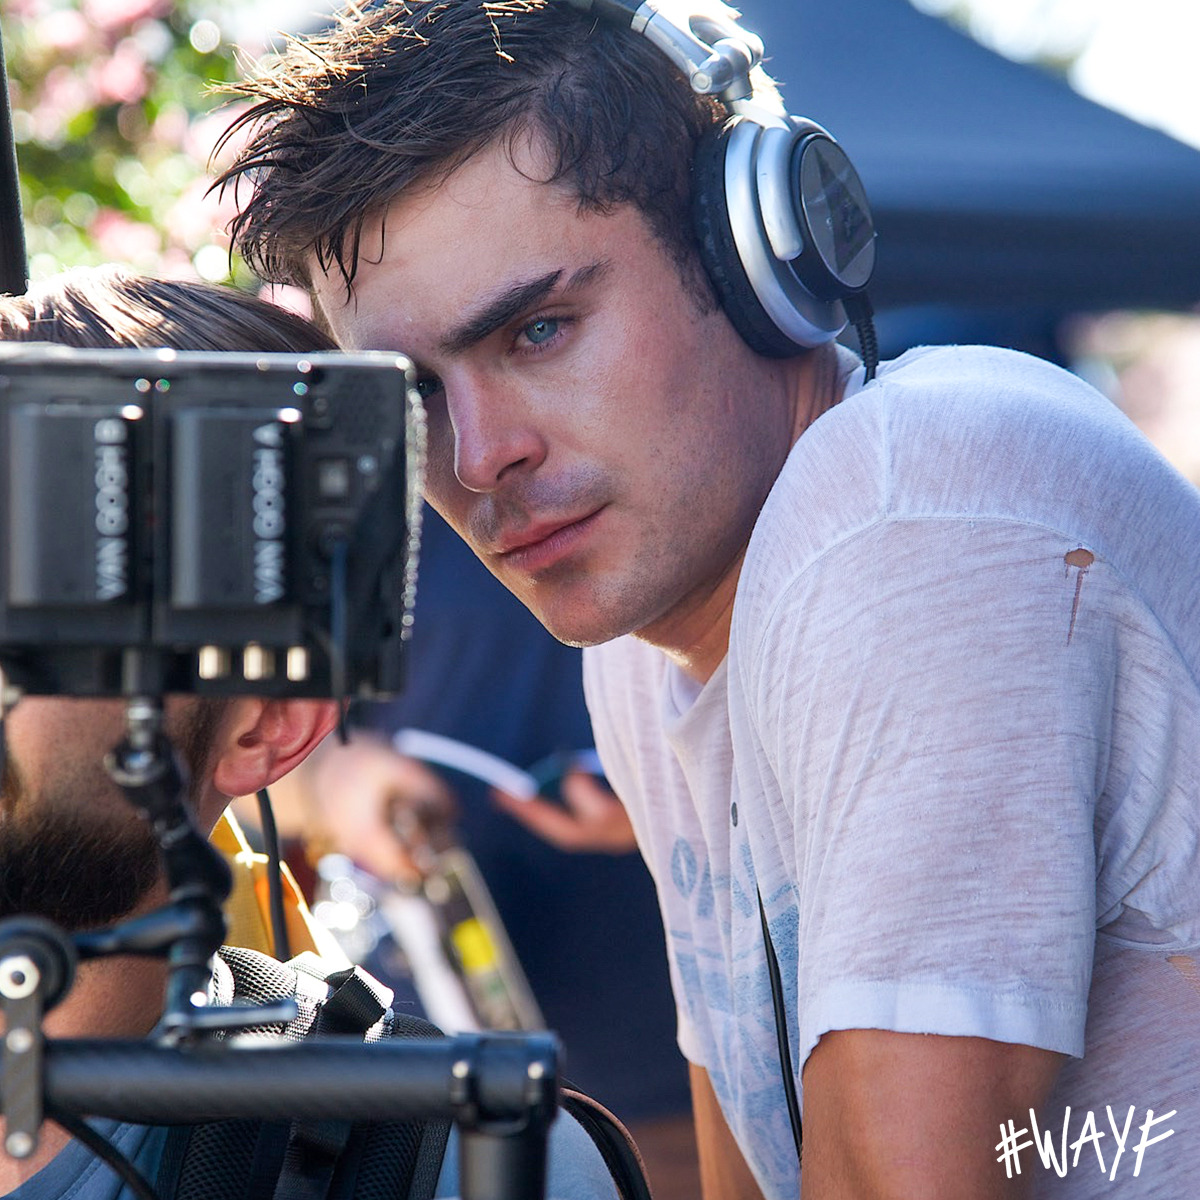 #TBT to last summer’s heat wave while filming #WAYF. 